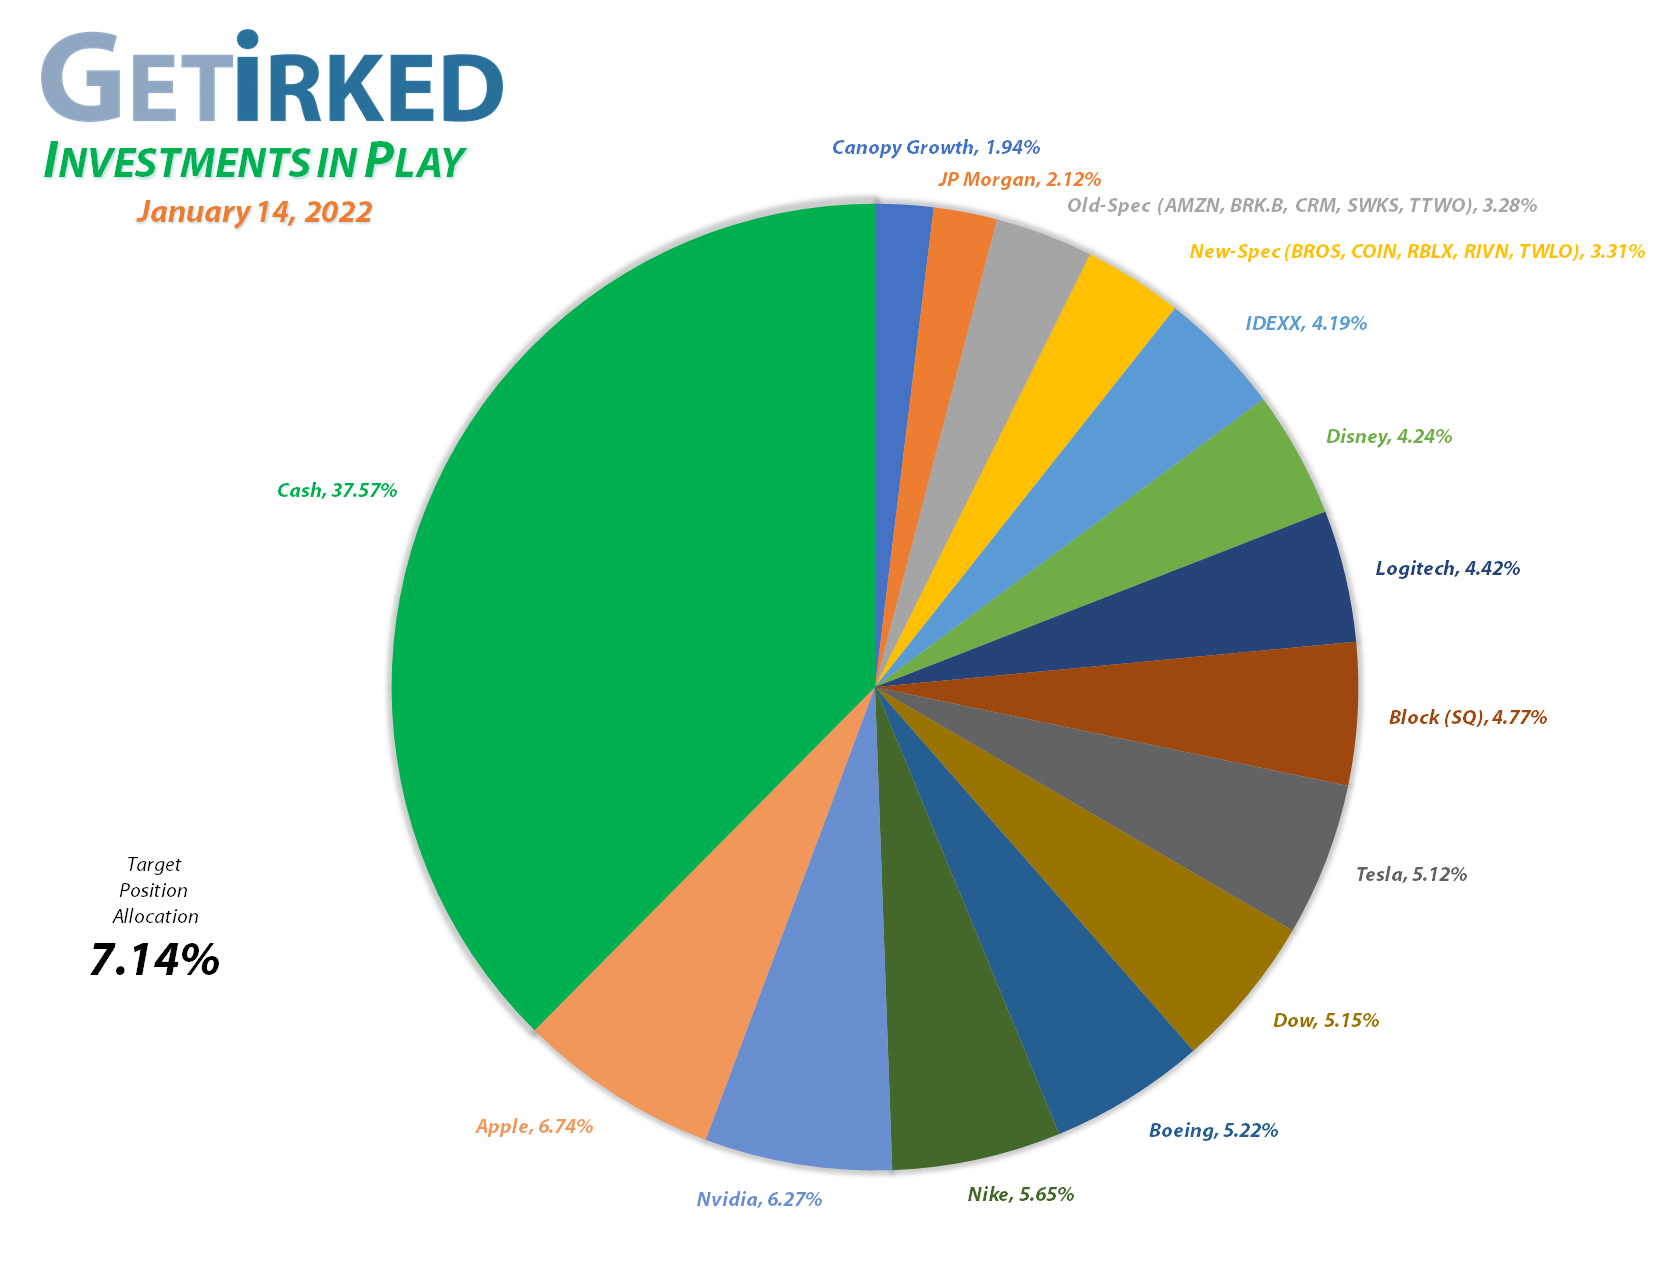 Get Irked - Investments in Play - Current Holdings - March 12, 2021et Irked's Pandemic Portfolio Holdings as of January 14, 2022